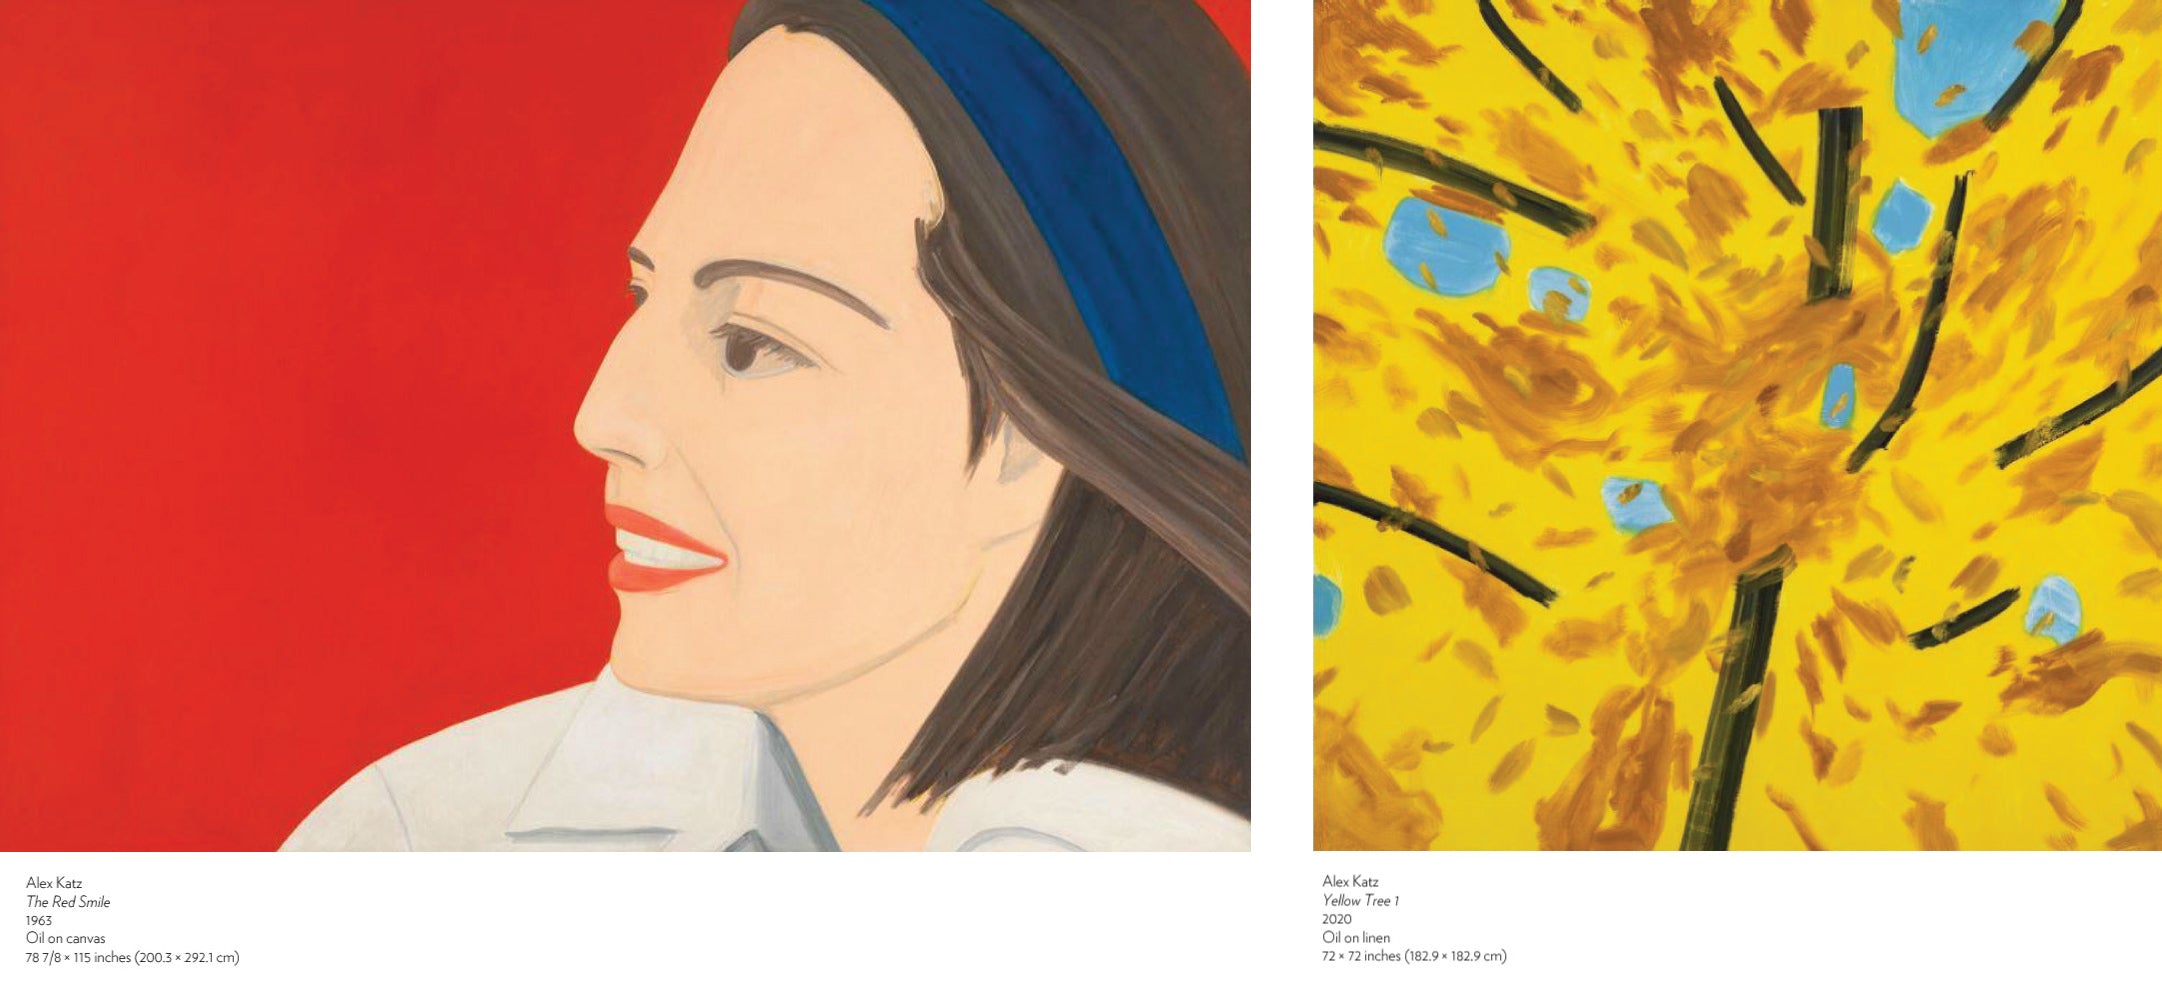 Alex Katz paintings The Red Smile and Yellow Tree 1